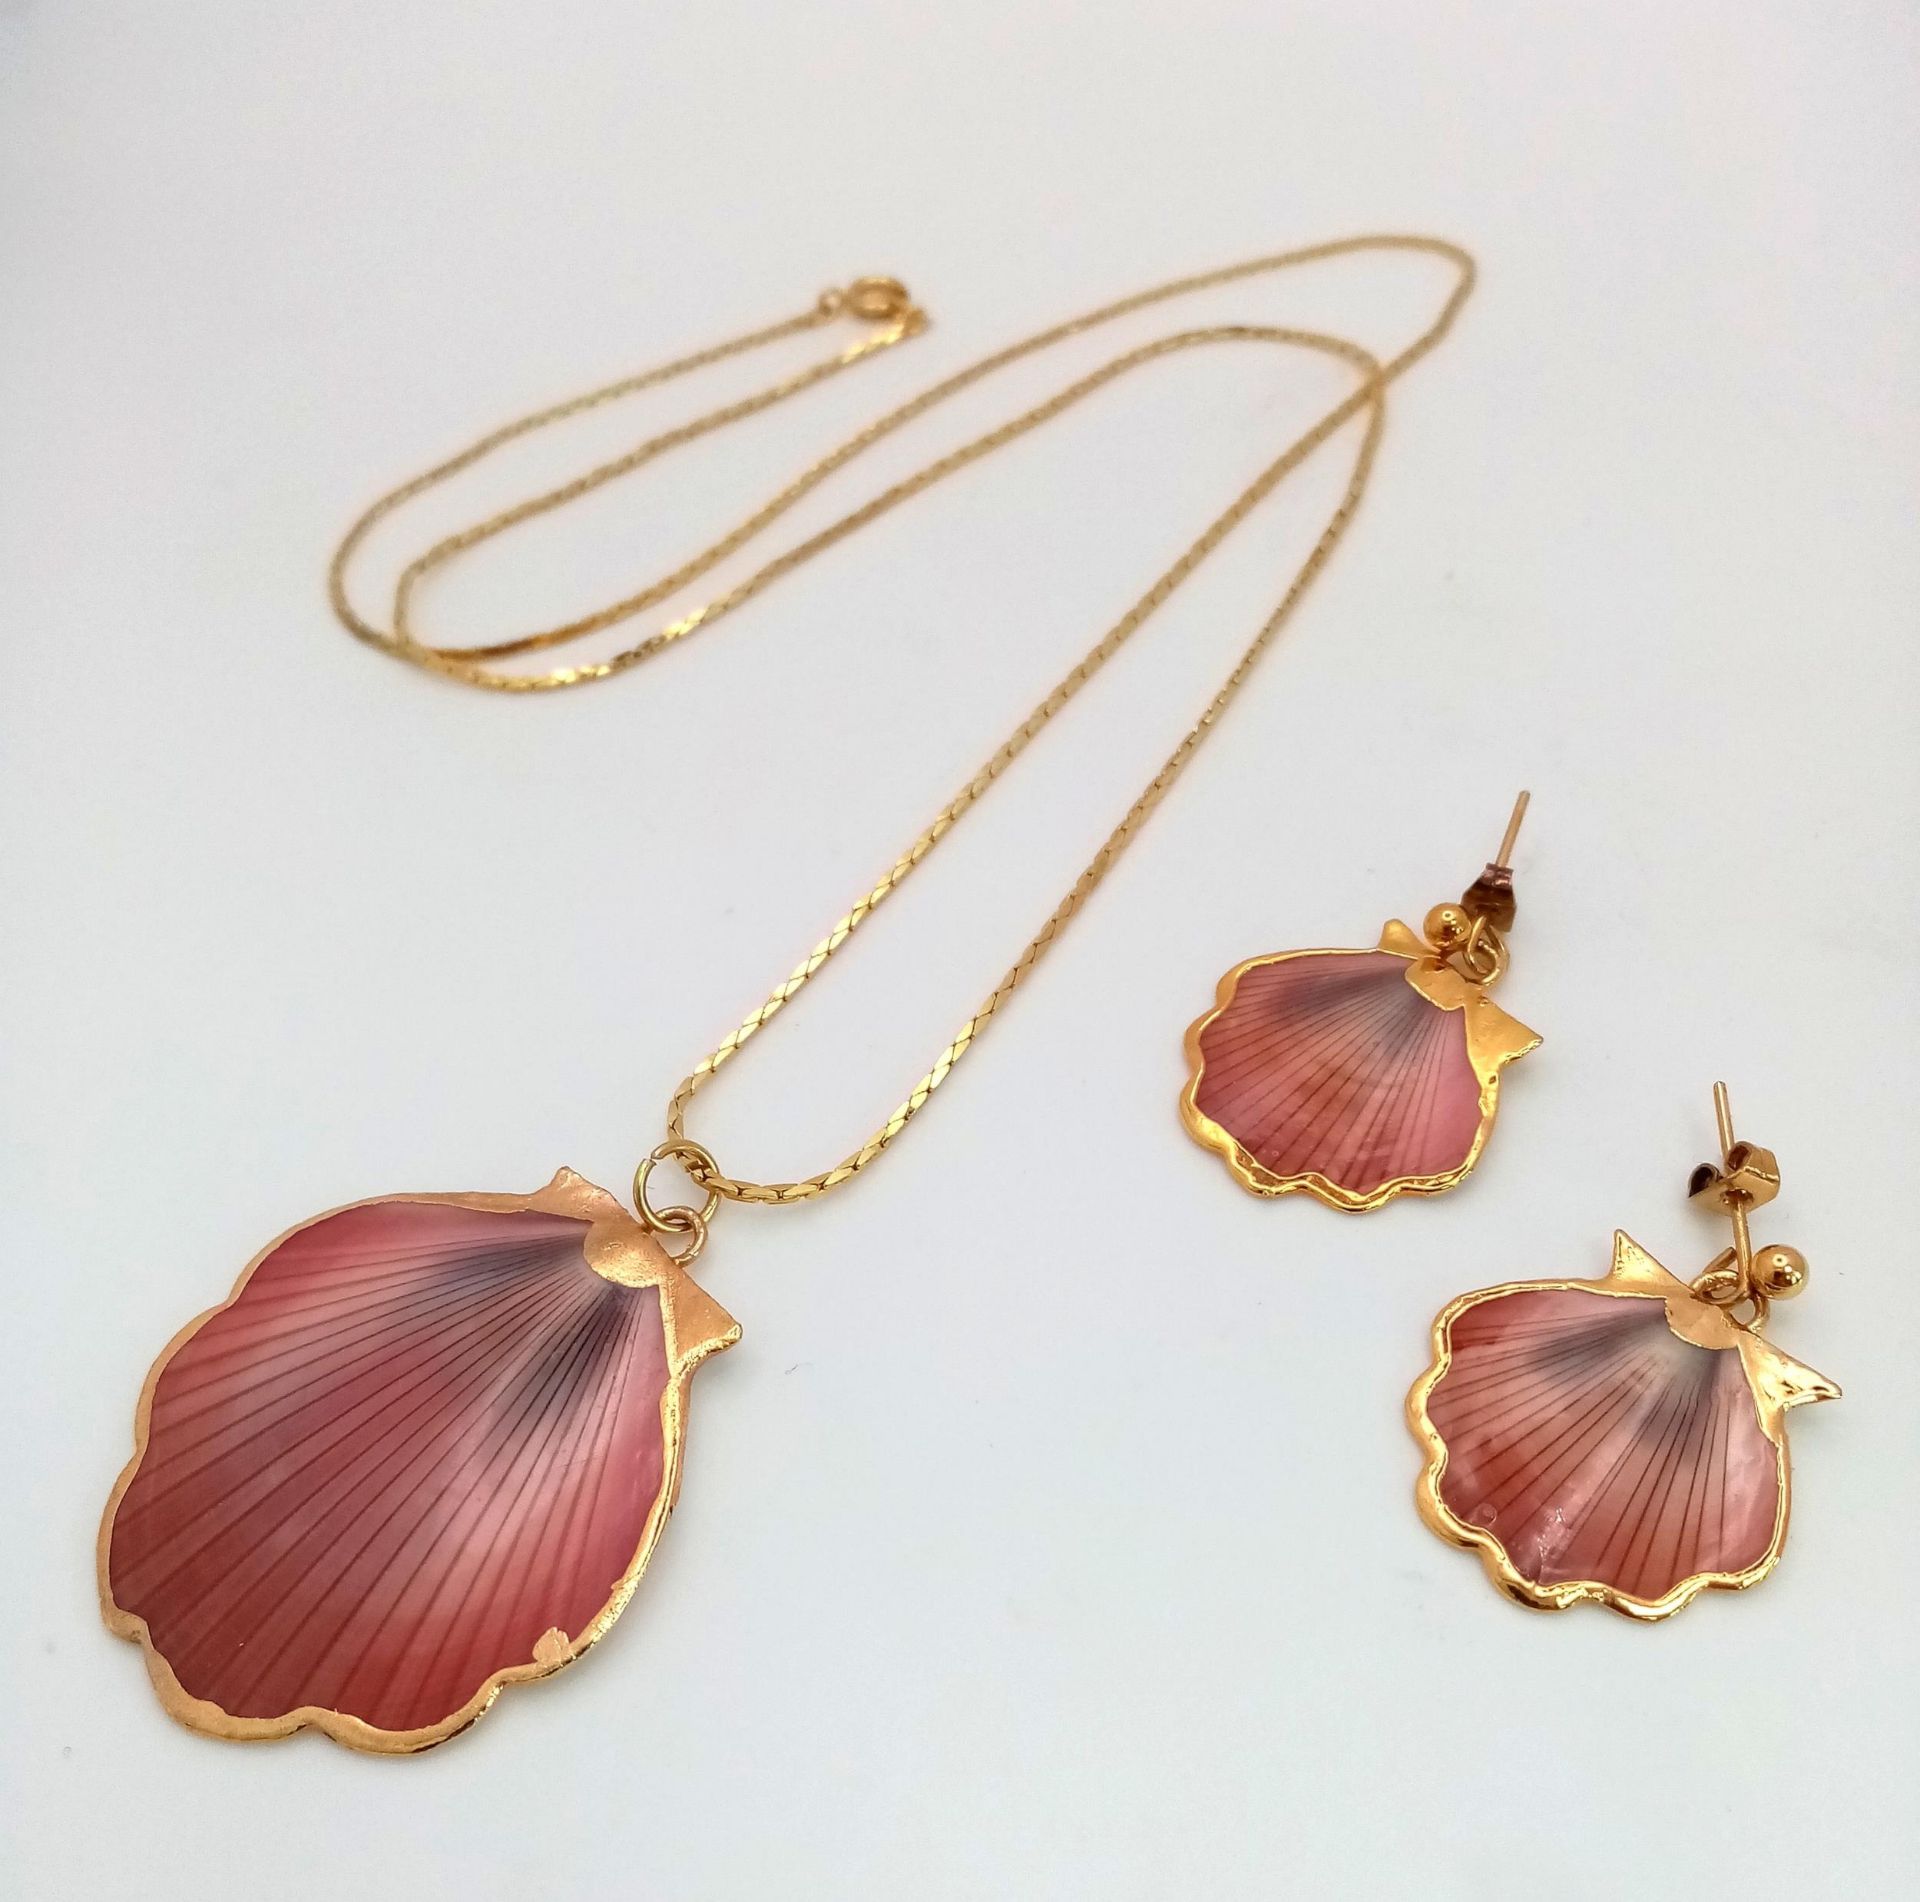 A 24 Carat Gold Plated Sea Shell Design Necklace and Matching Earring Set. Necklace 60cm Length,